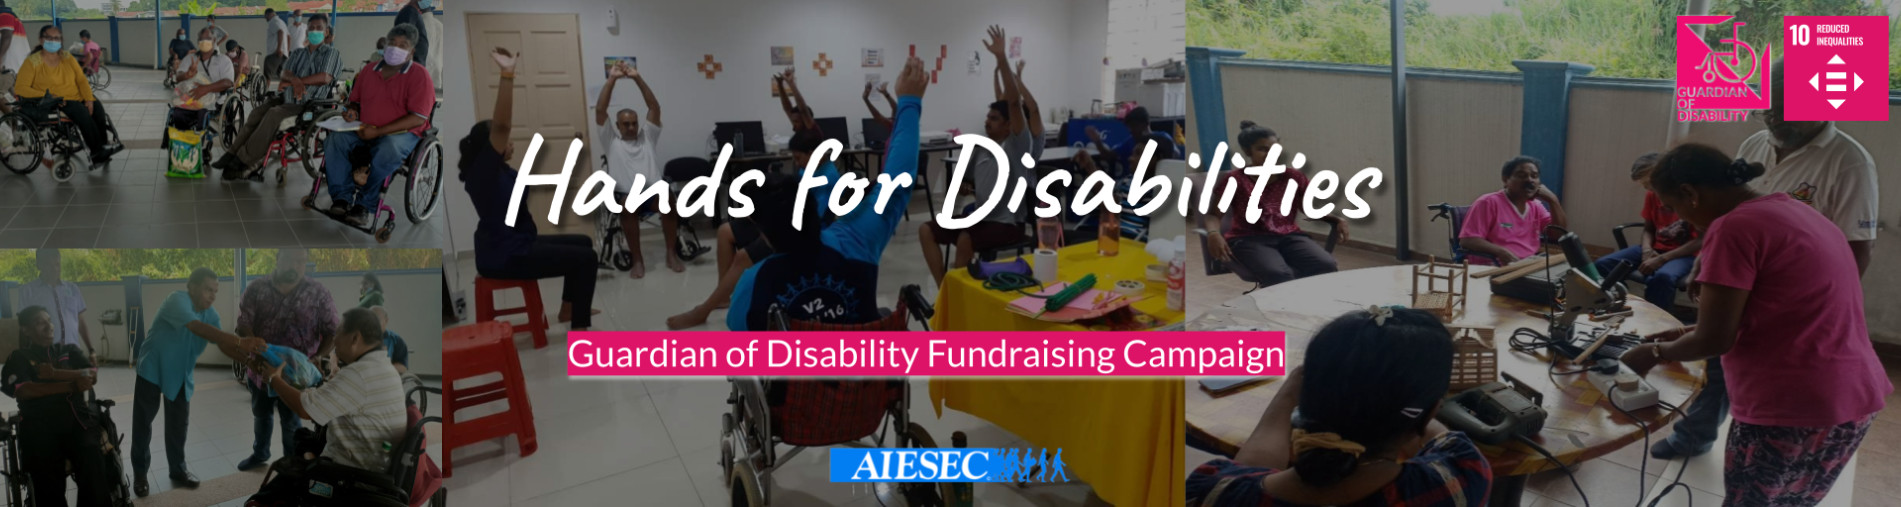 Hands for Disabilities Fundraising Campaign